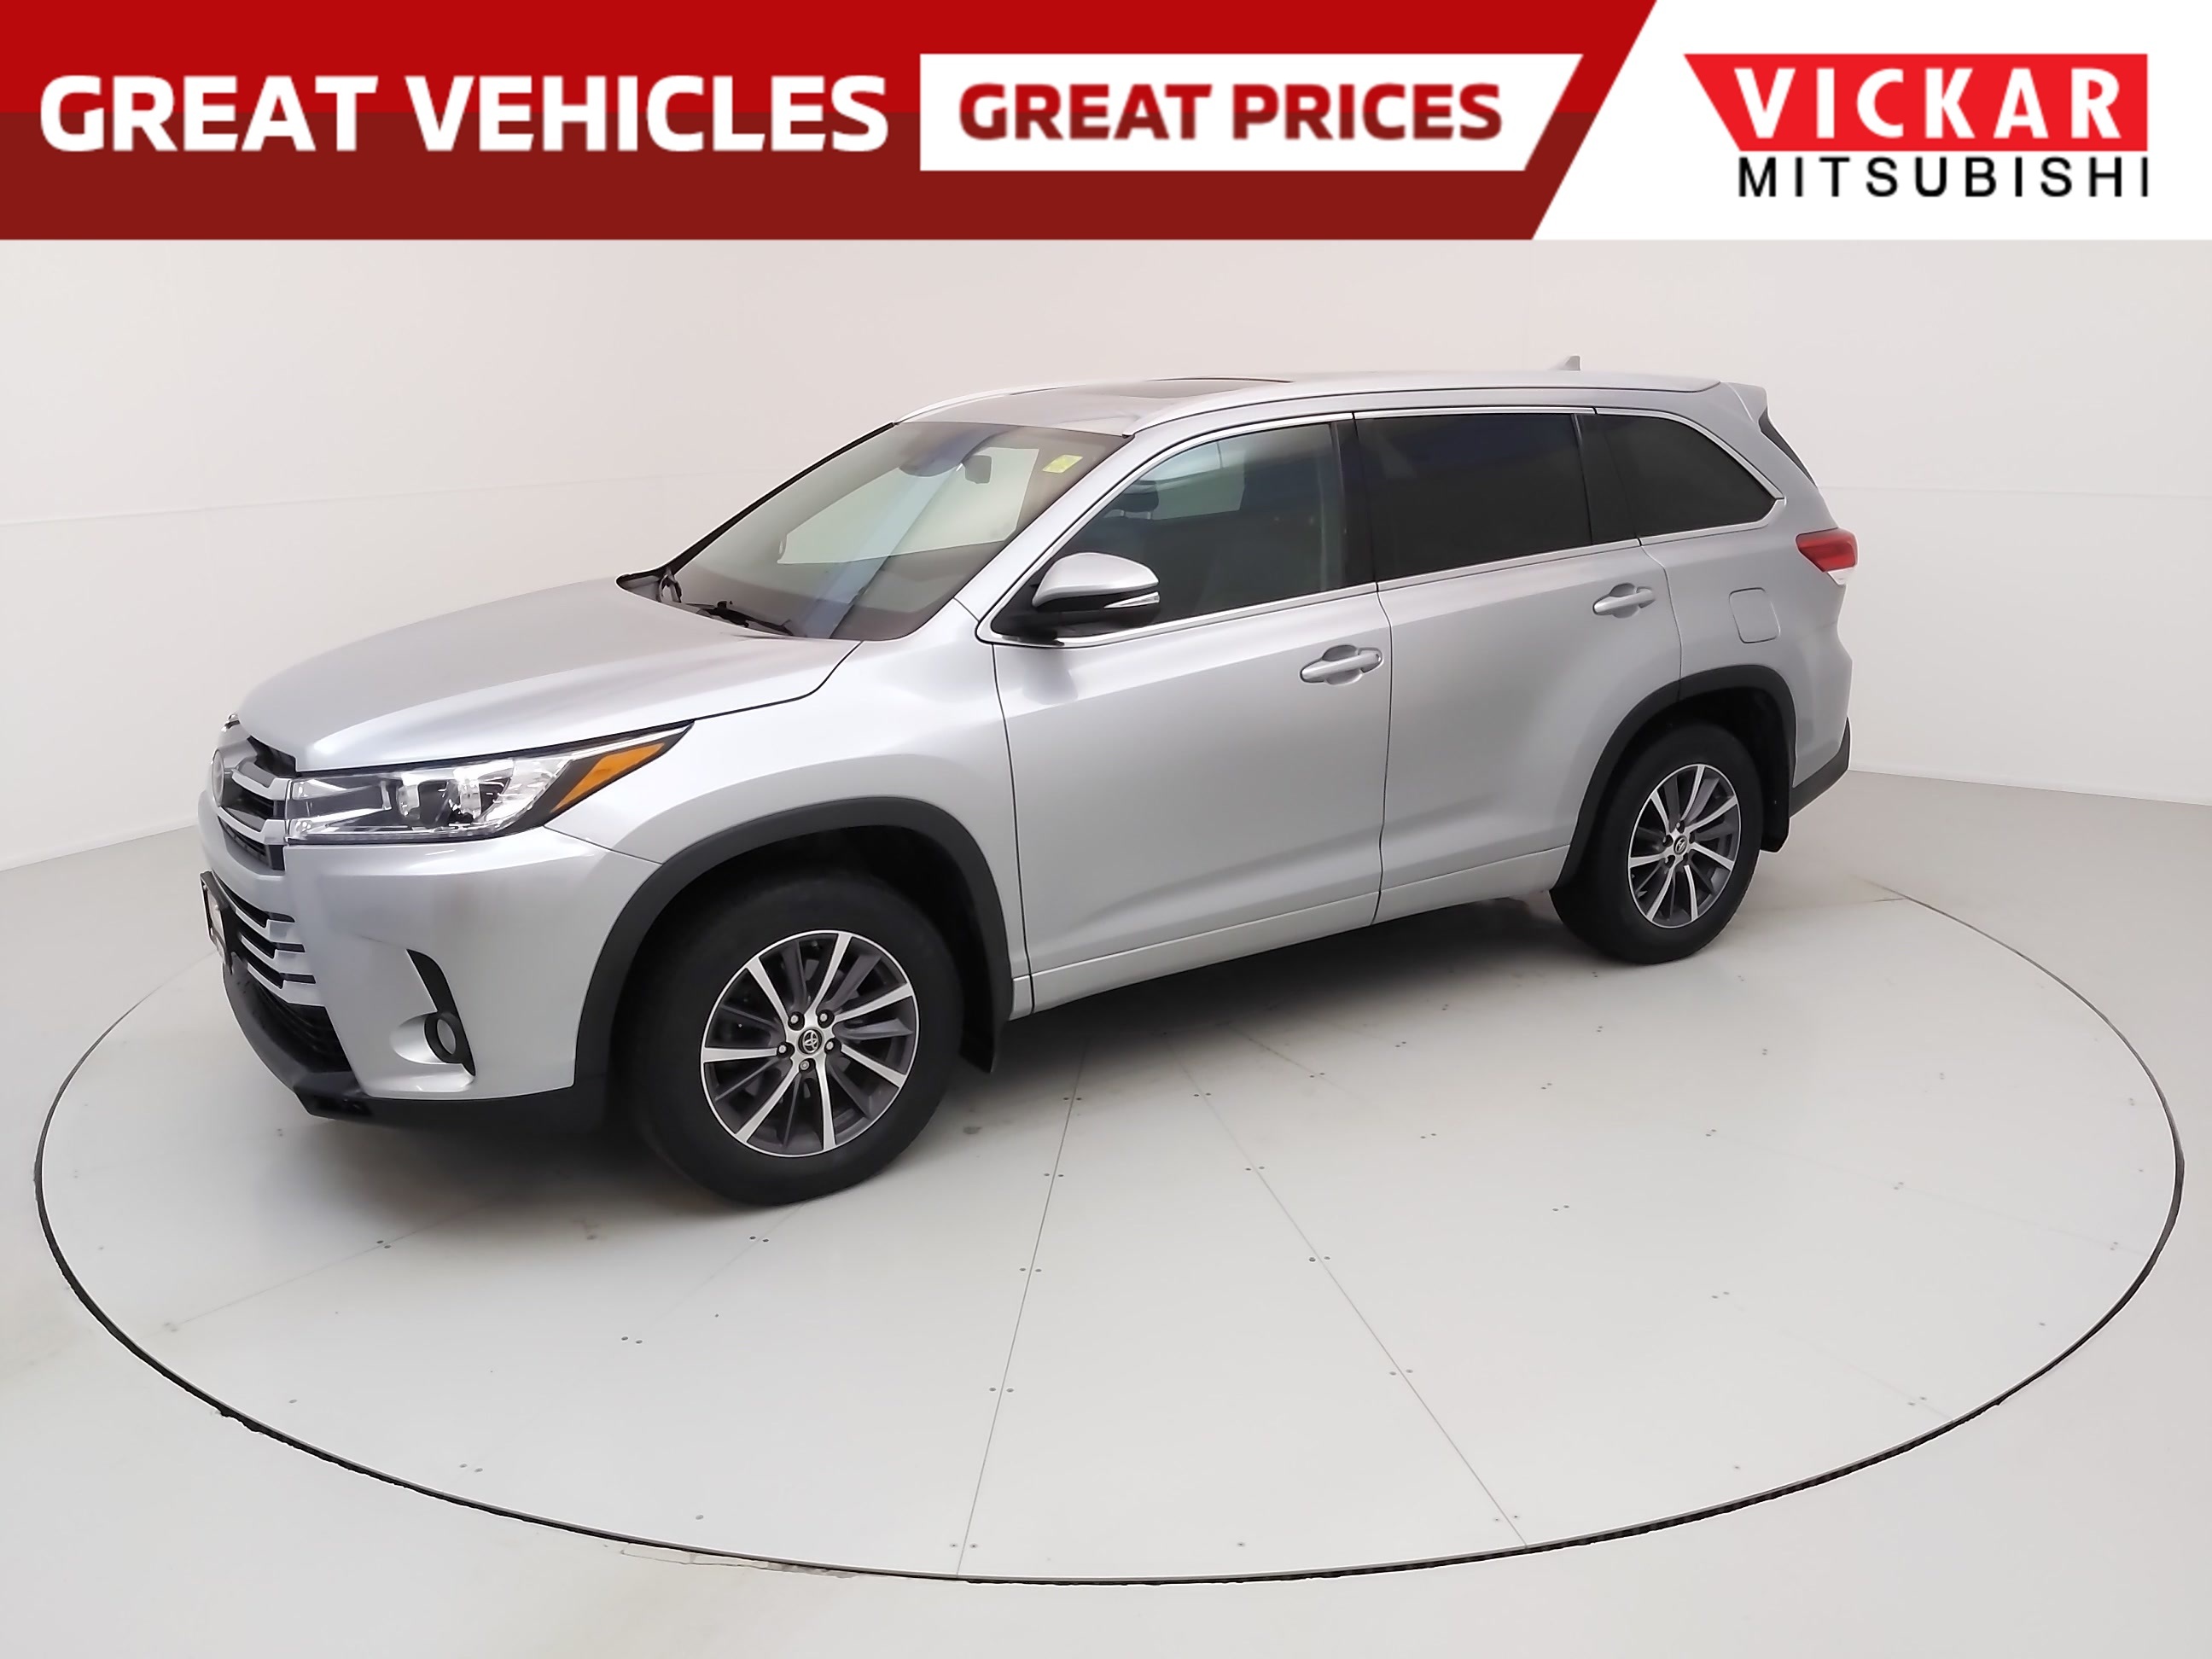 2017 Toyota Highlander AWD 4dr XLE 7 SEATER FULL LOADED 